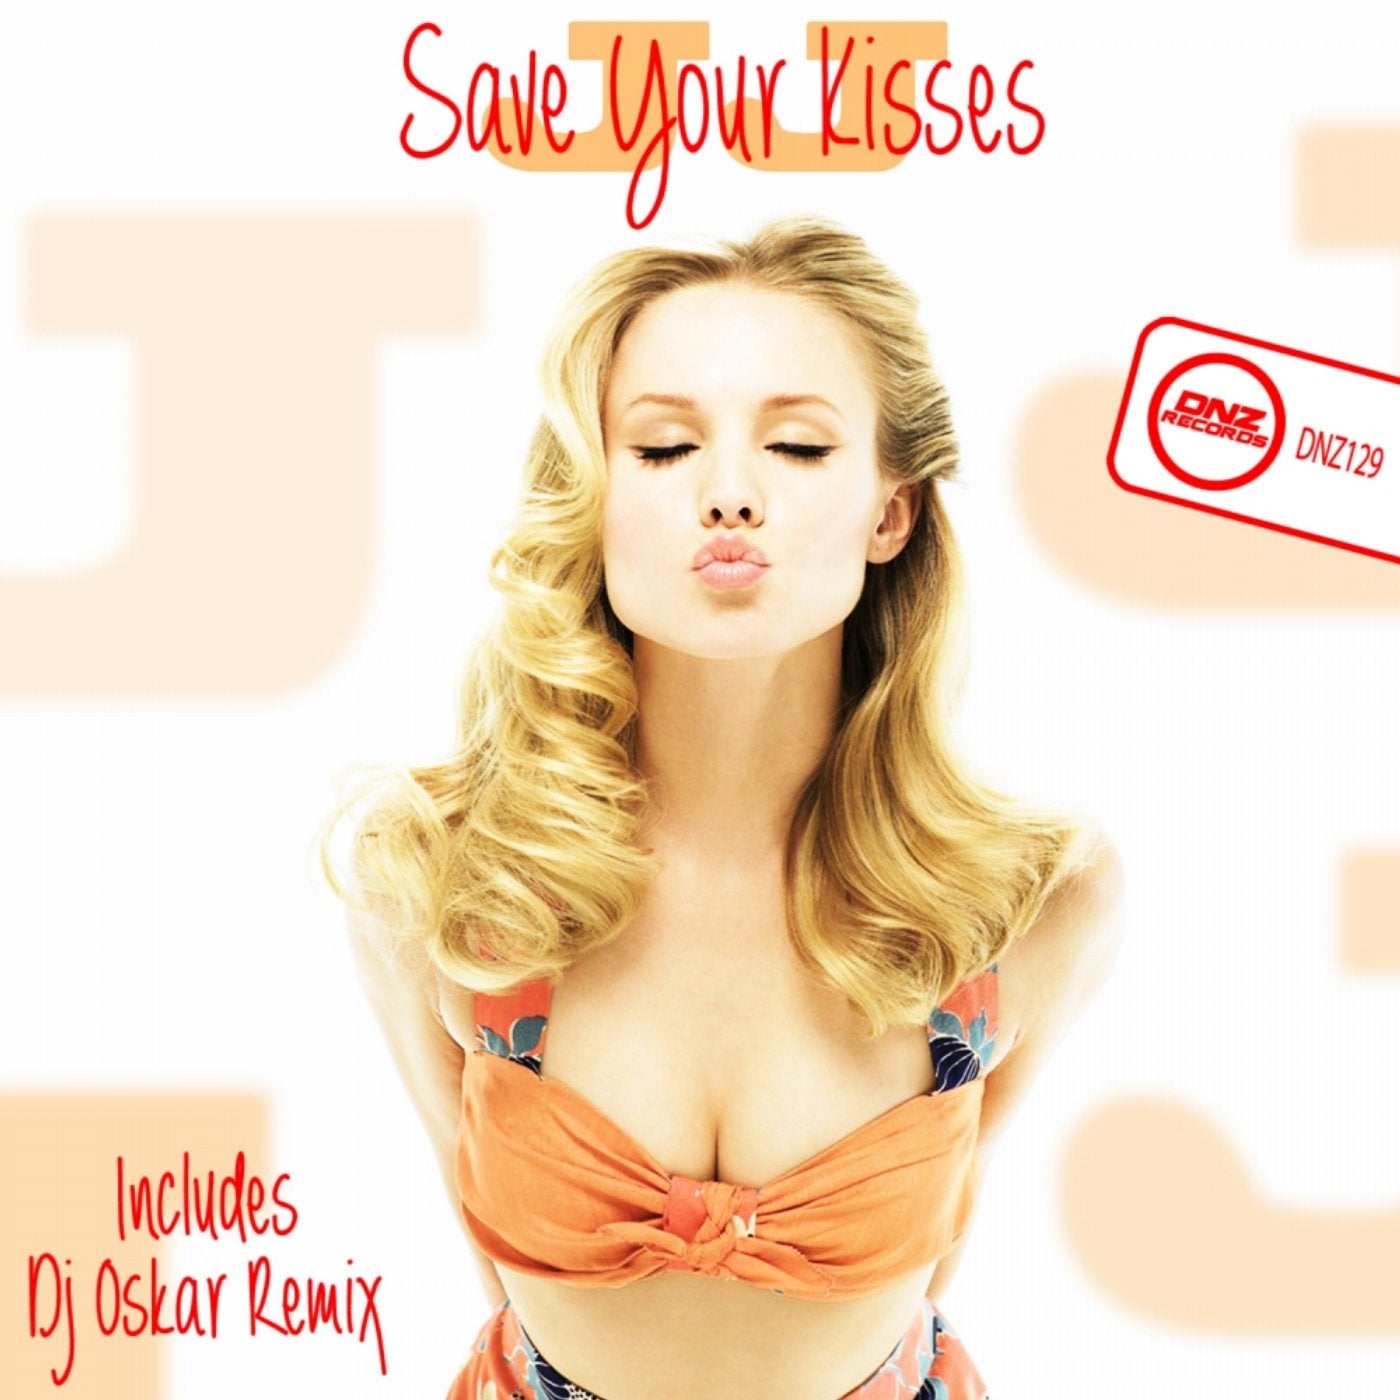 Save Your Kisses